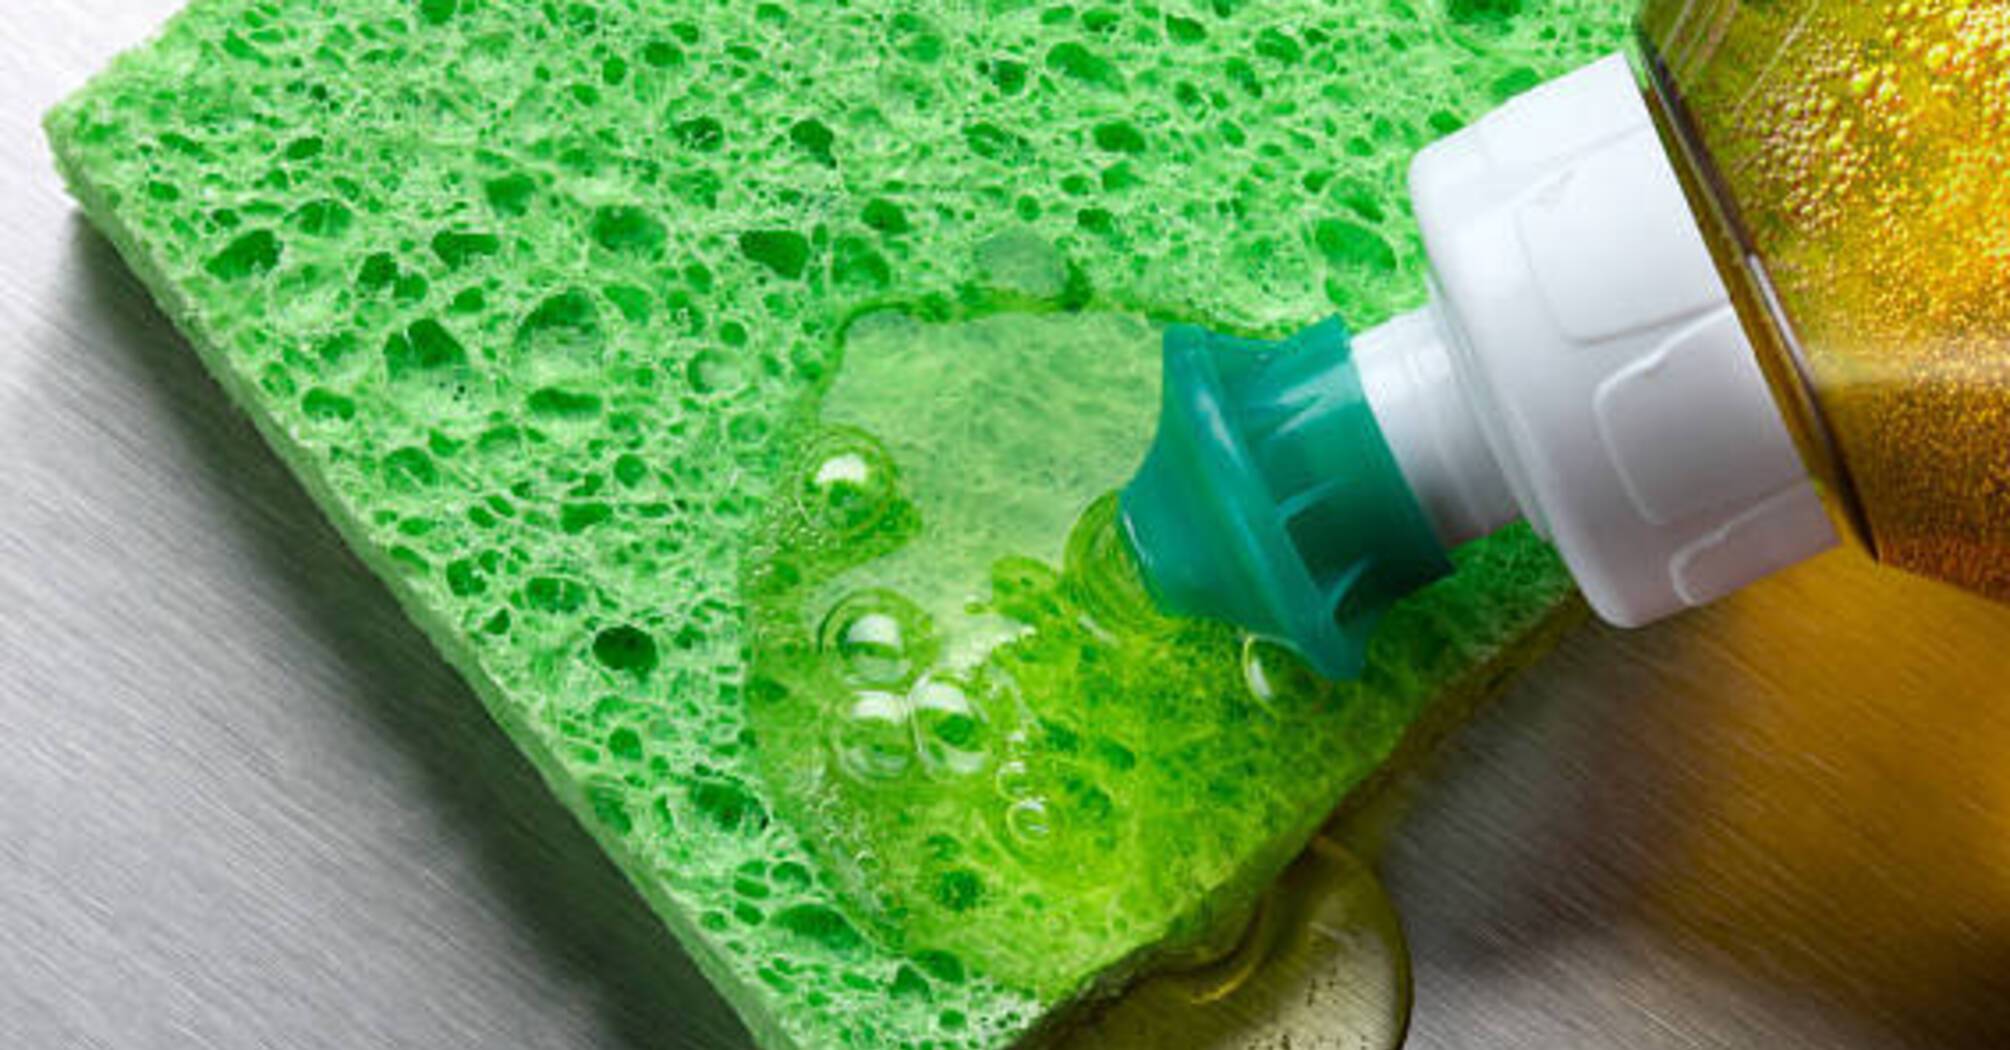 How to use dishwashing detergent in everyday life: 5 interesting tips